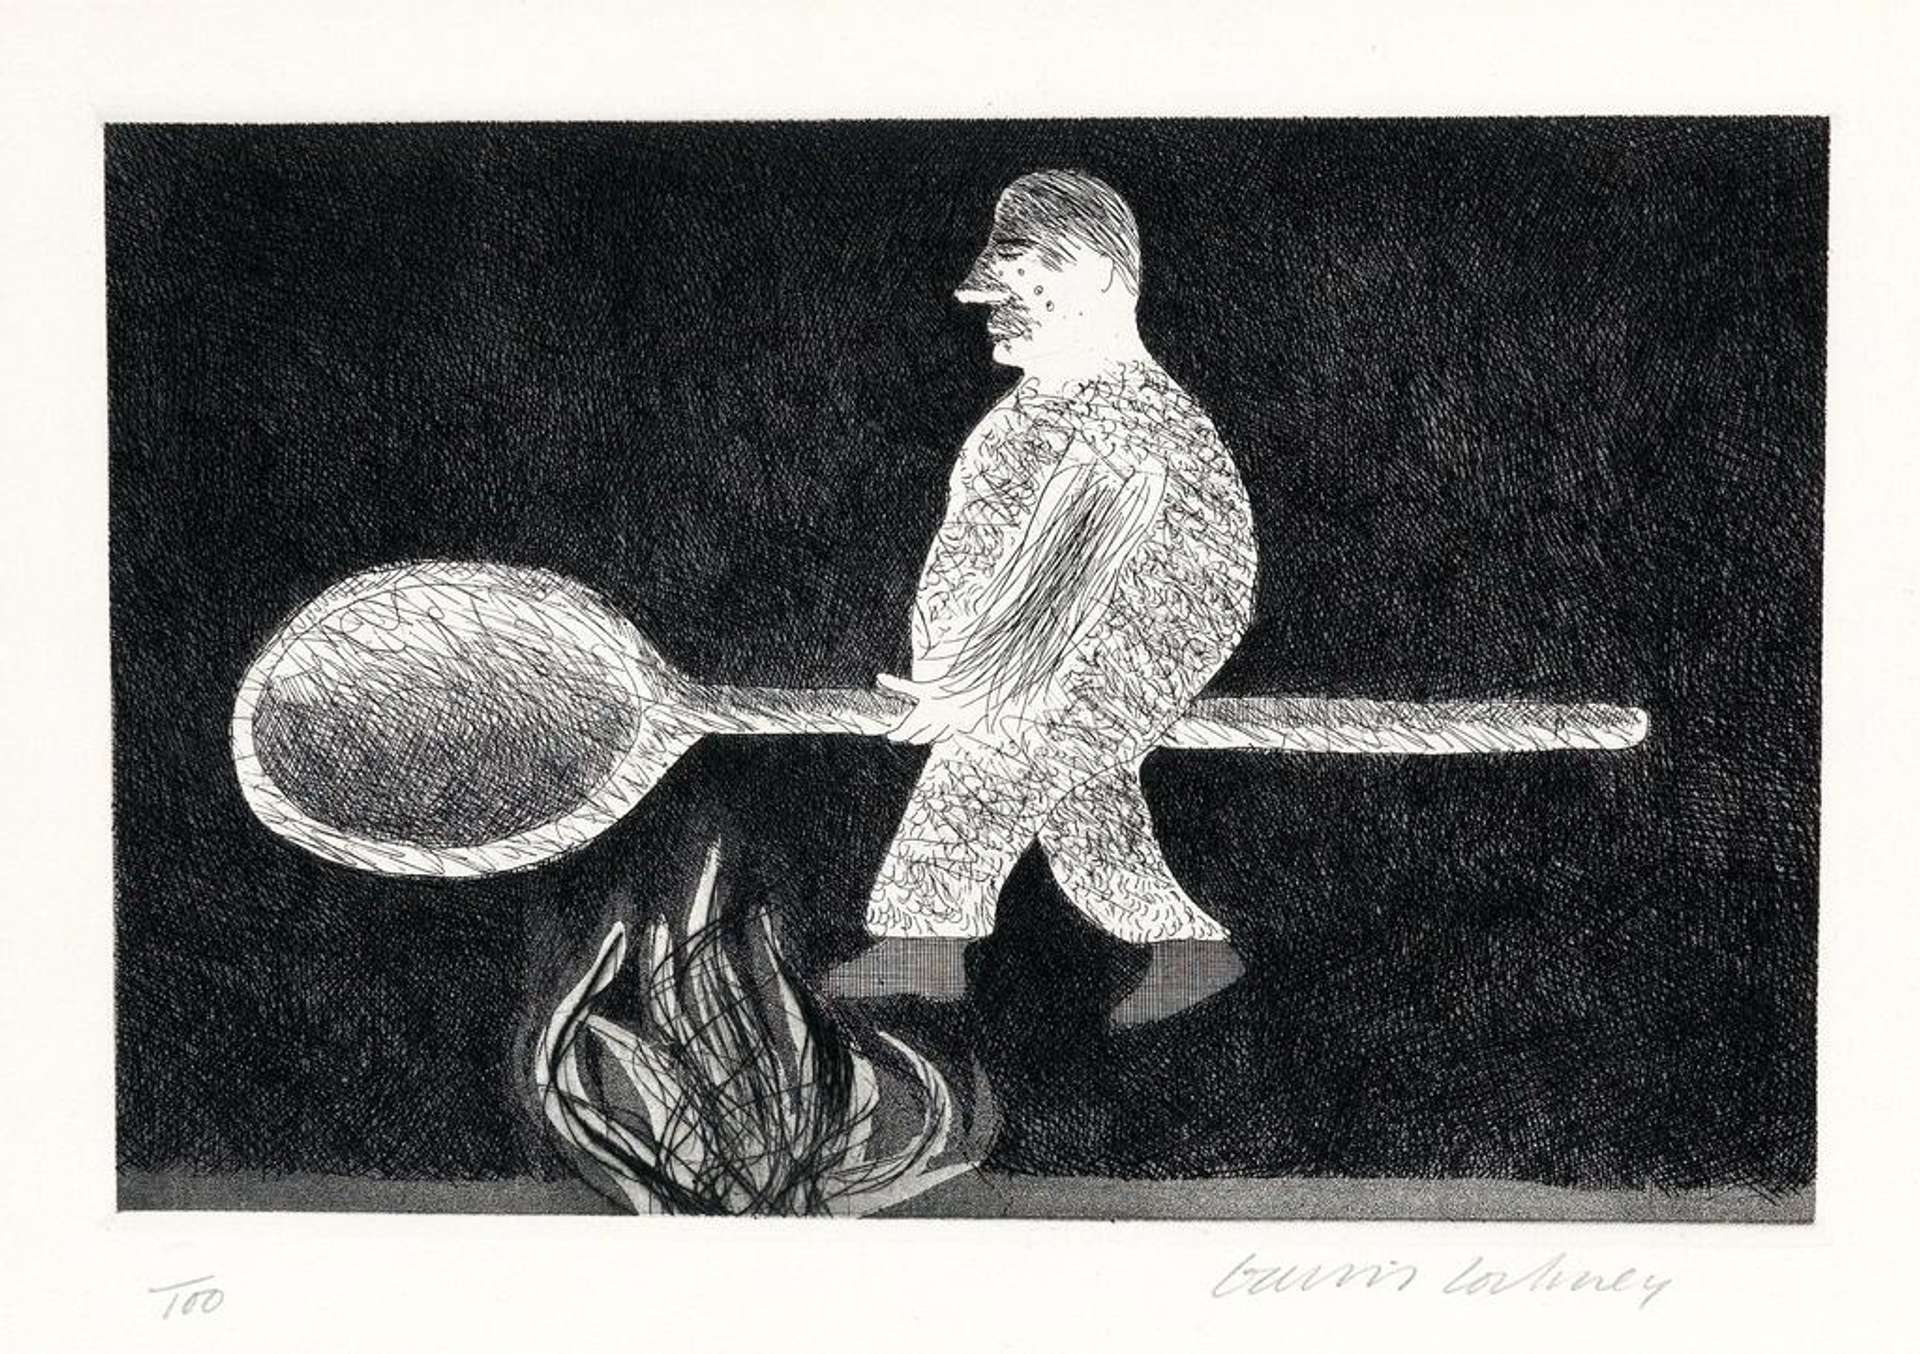 Riding Around On A Cooking Spoon - David Hockney 1969